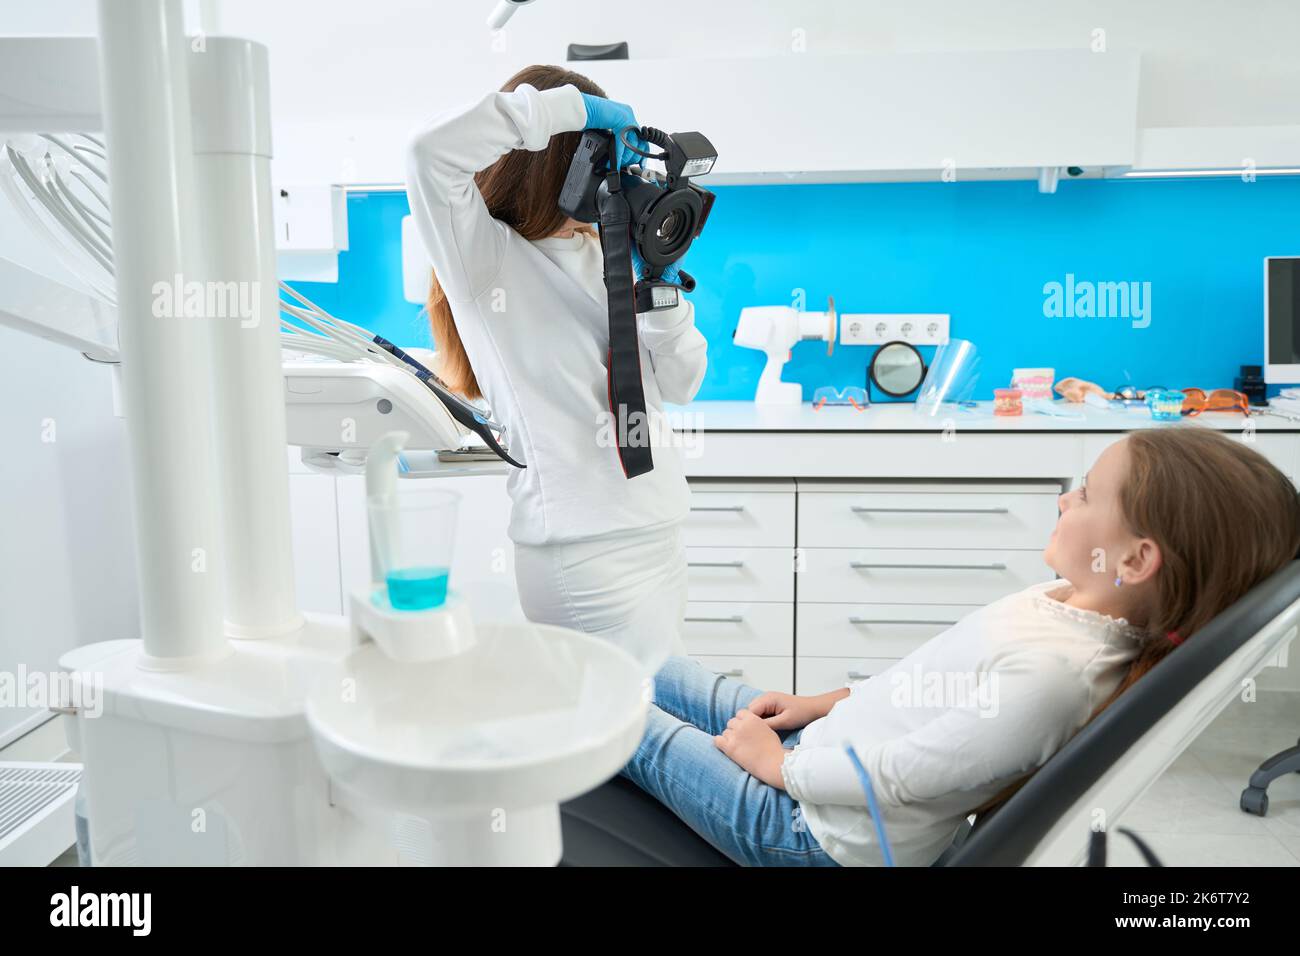 Pediatric dentist taking dental photos of young patient Stock Photo